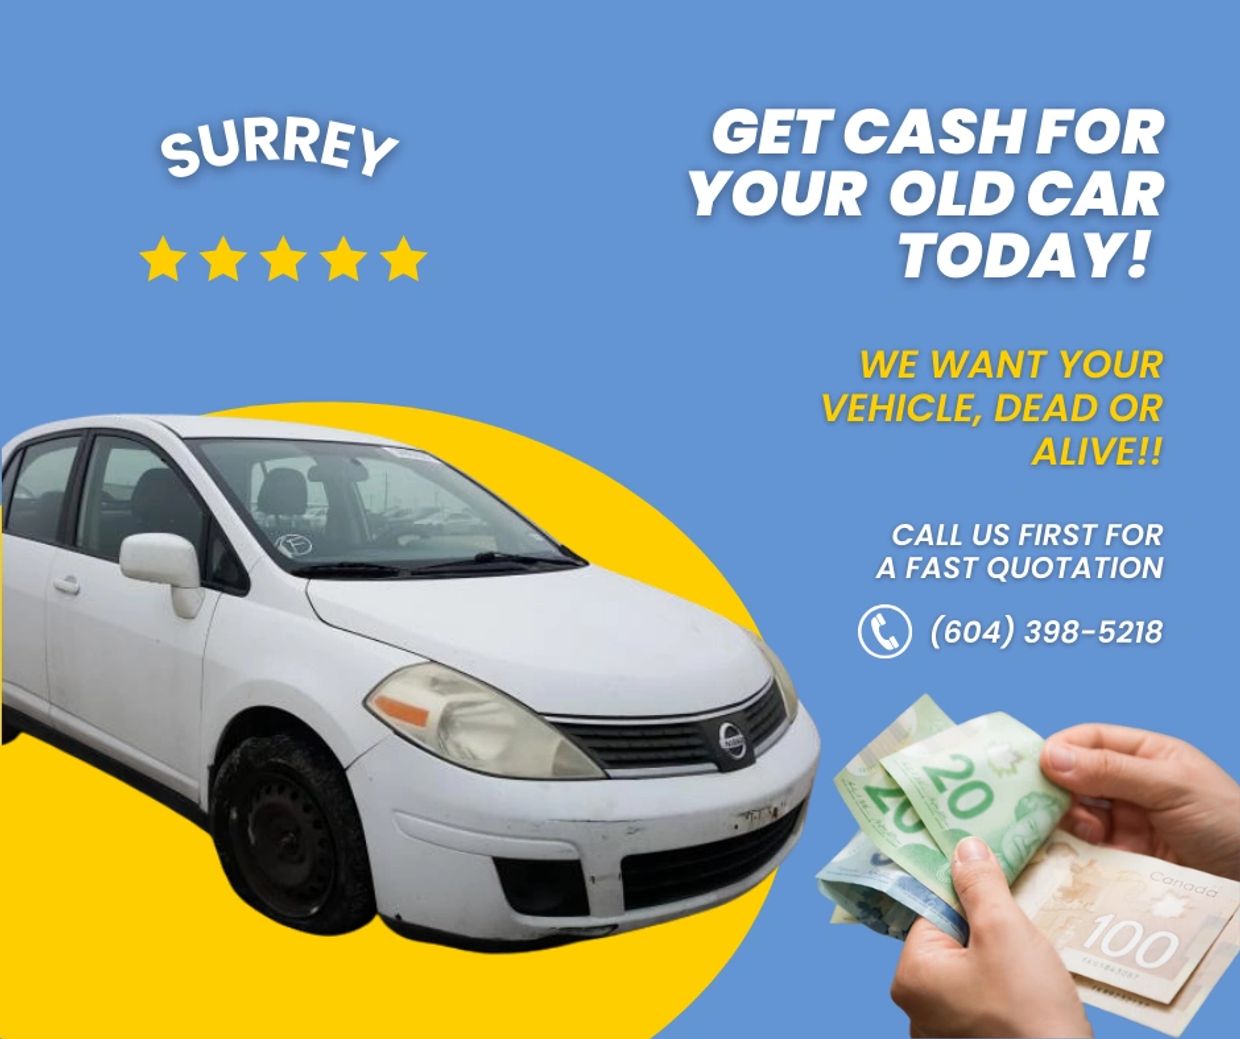 A used car buyer in Surrey handing over Canadian dollars to a client in exchange for their vehicle.